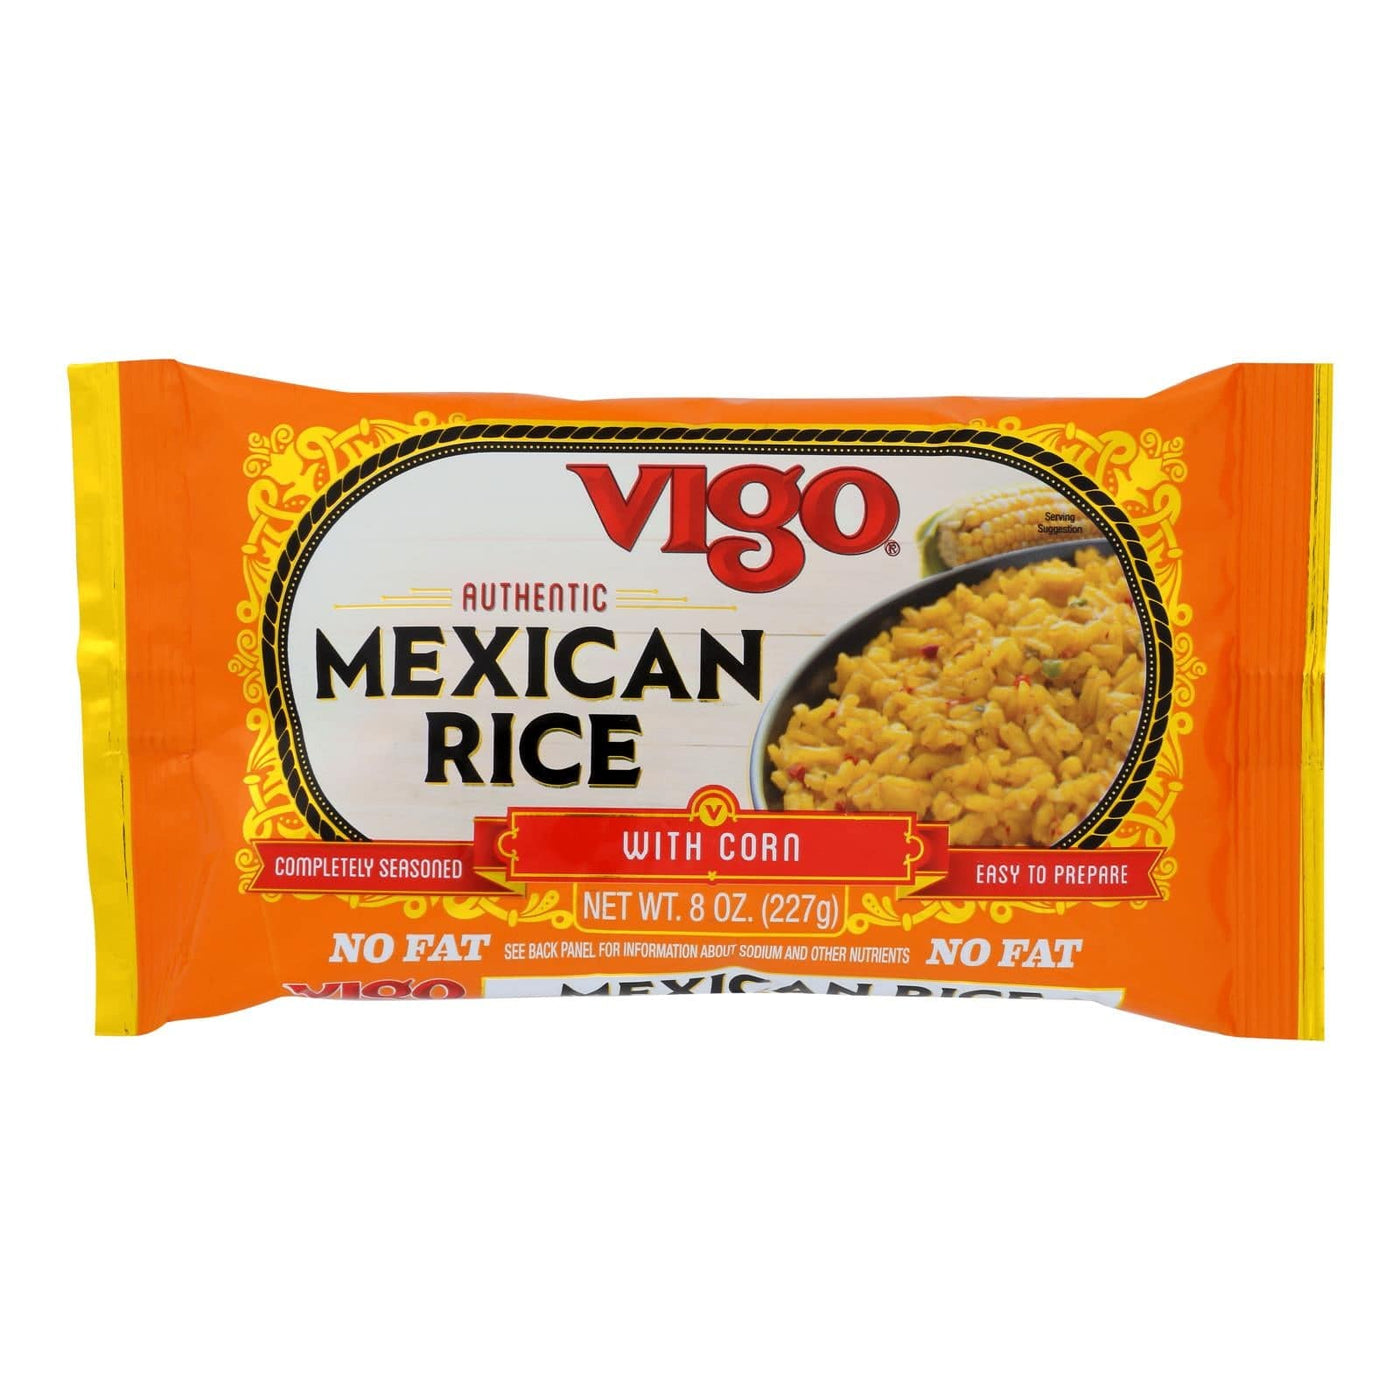 Buy Vigo Mexican Rice - Case Of 12 - 8 Oz.  at OnlyNaturals.us